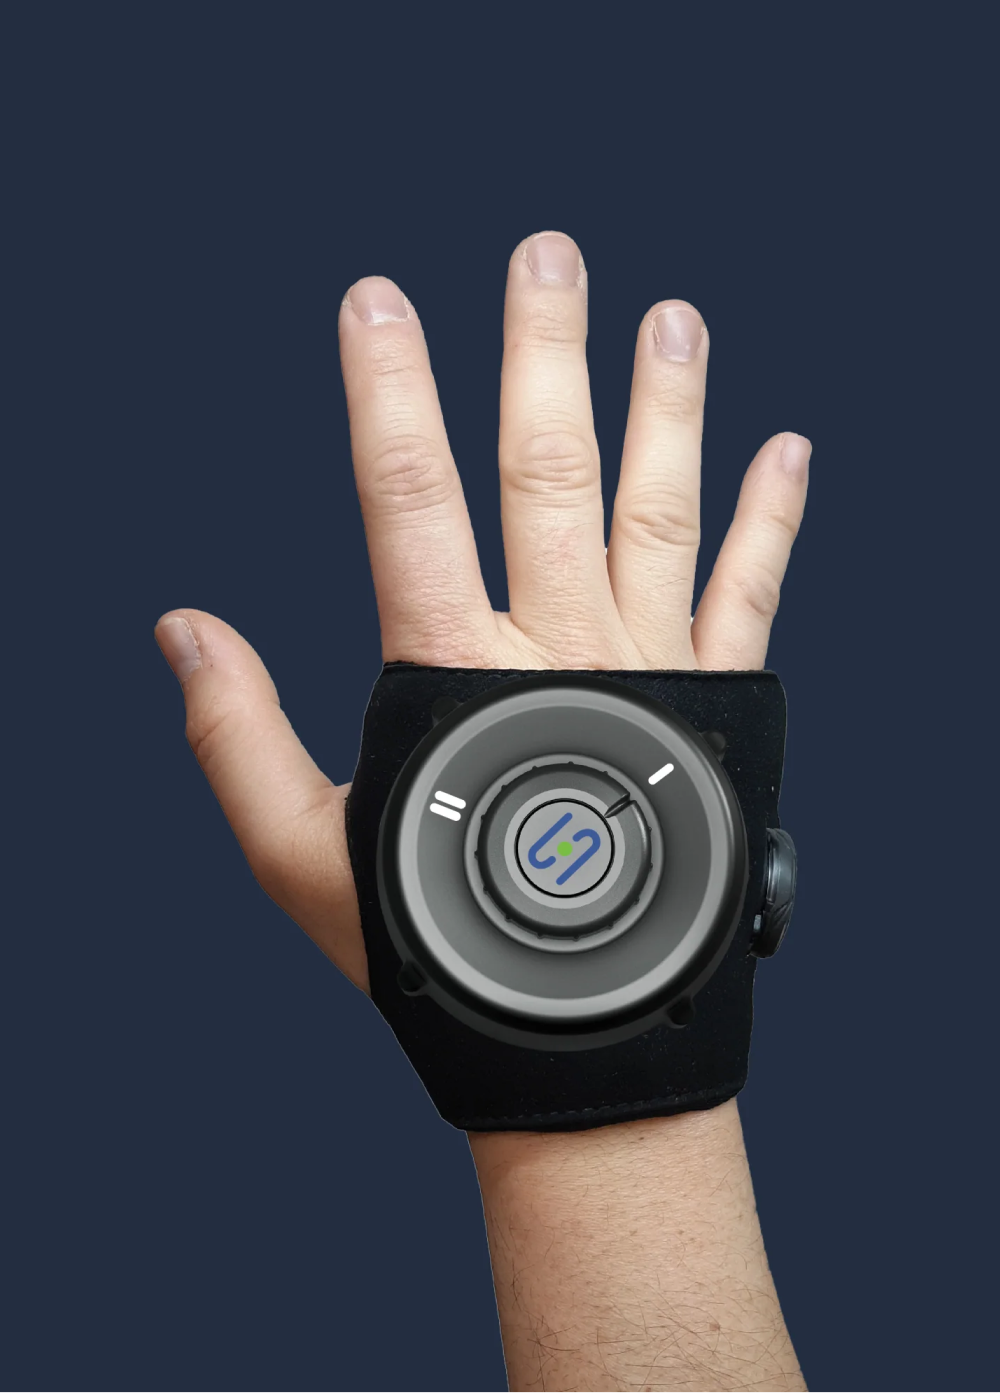 Geocentric concept watch puts an orrery on your wrist